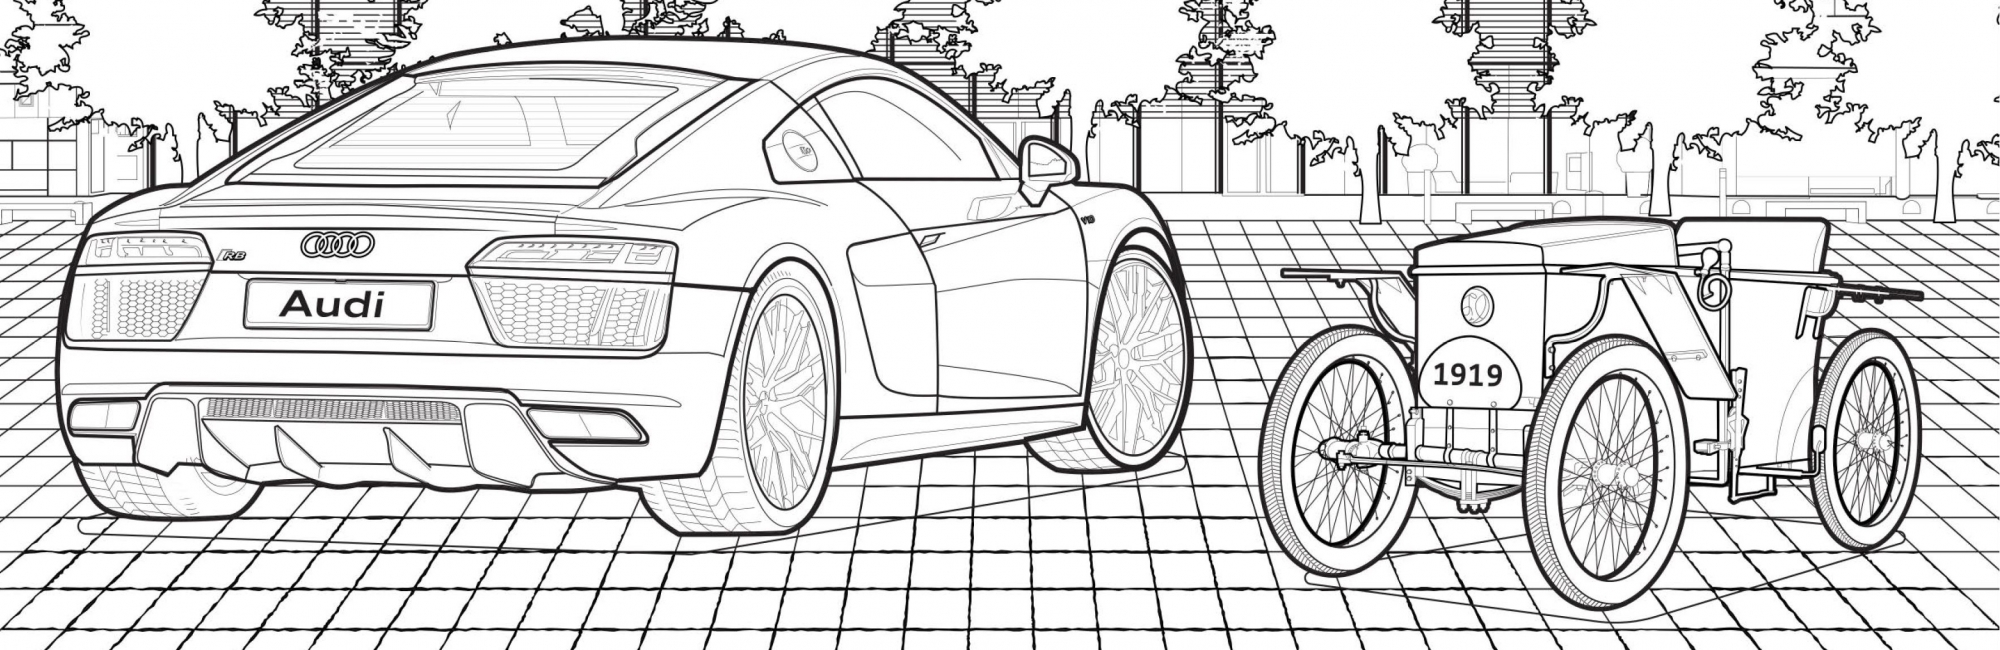 Quarantine Got You Down Check Out Audi S Free Coloring Book